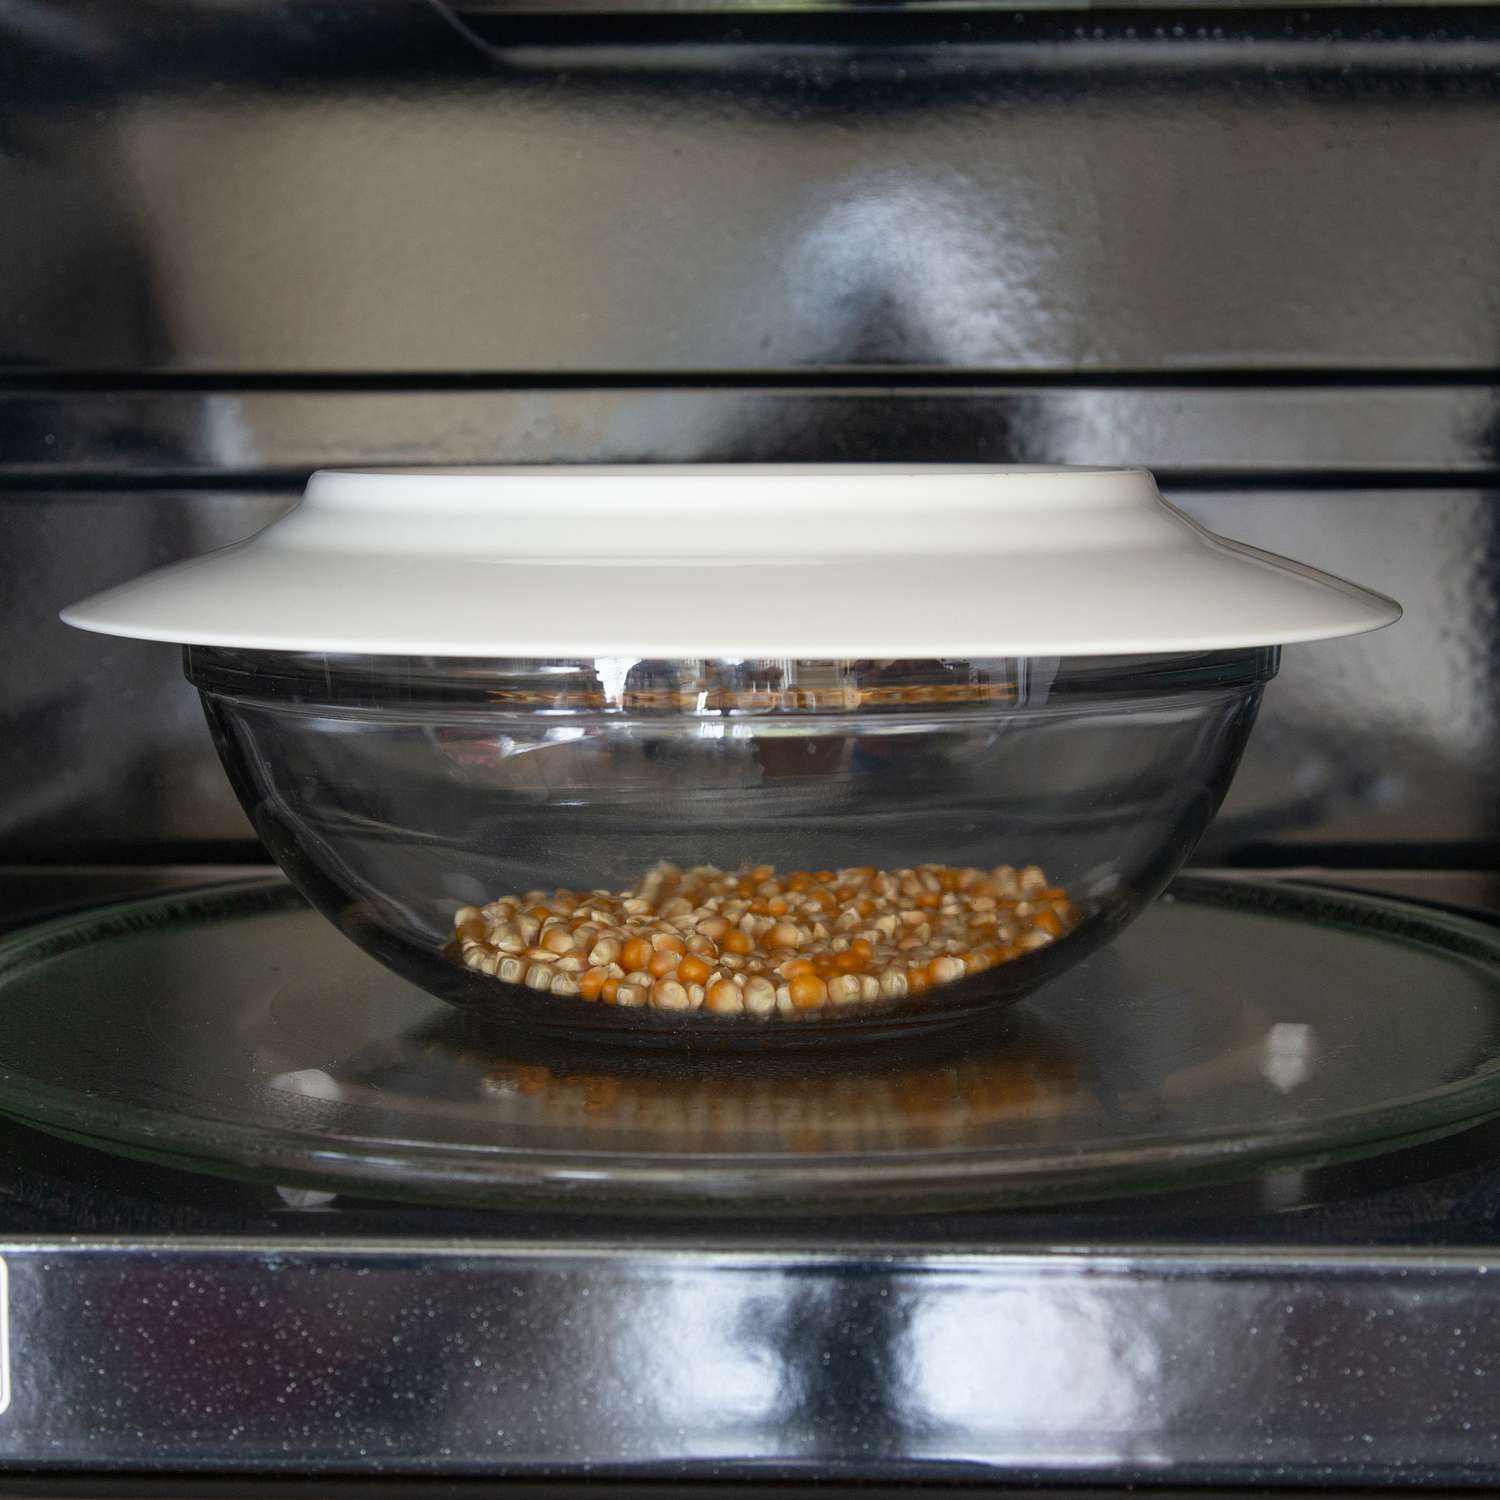 Popcorn kernels in a glass bowl with a white plate on the top in a microwave